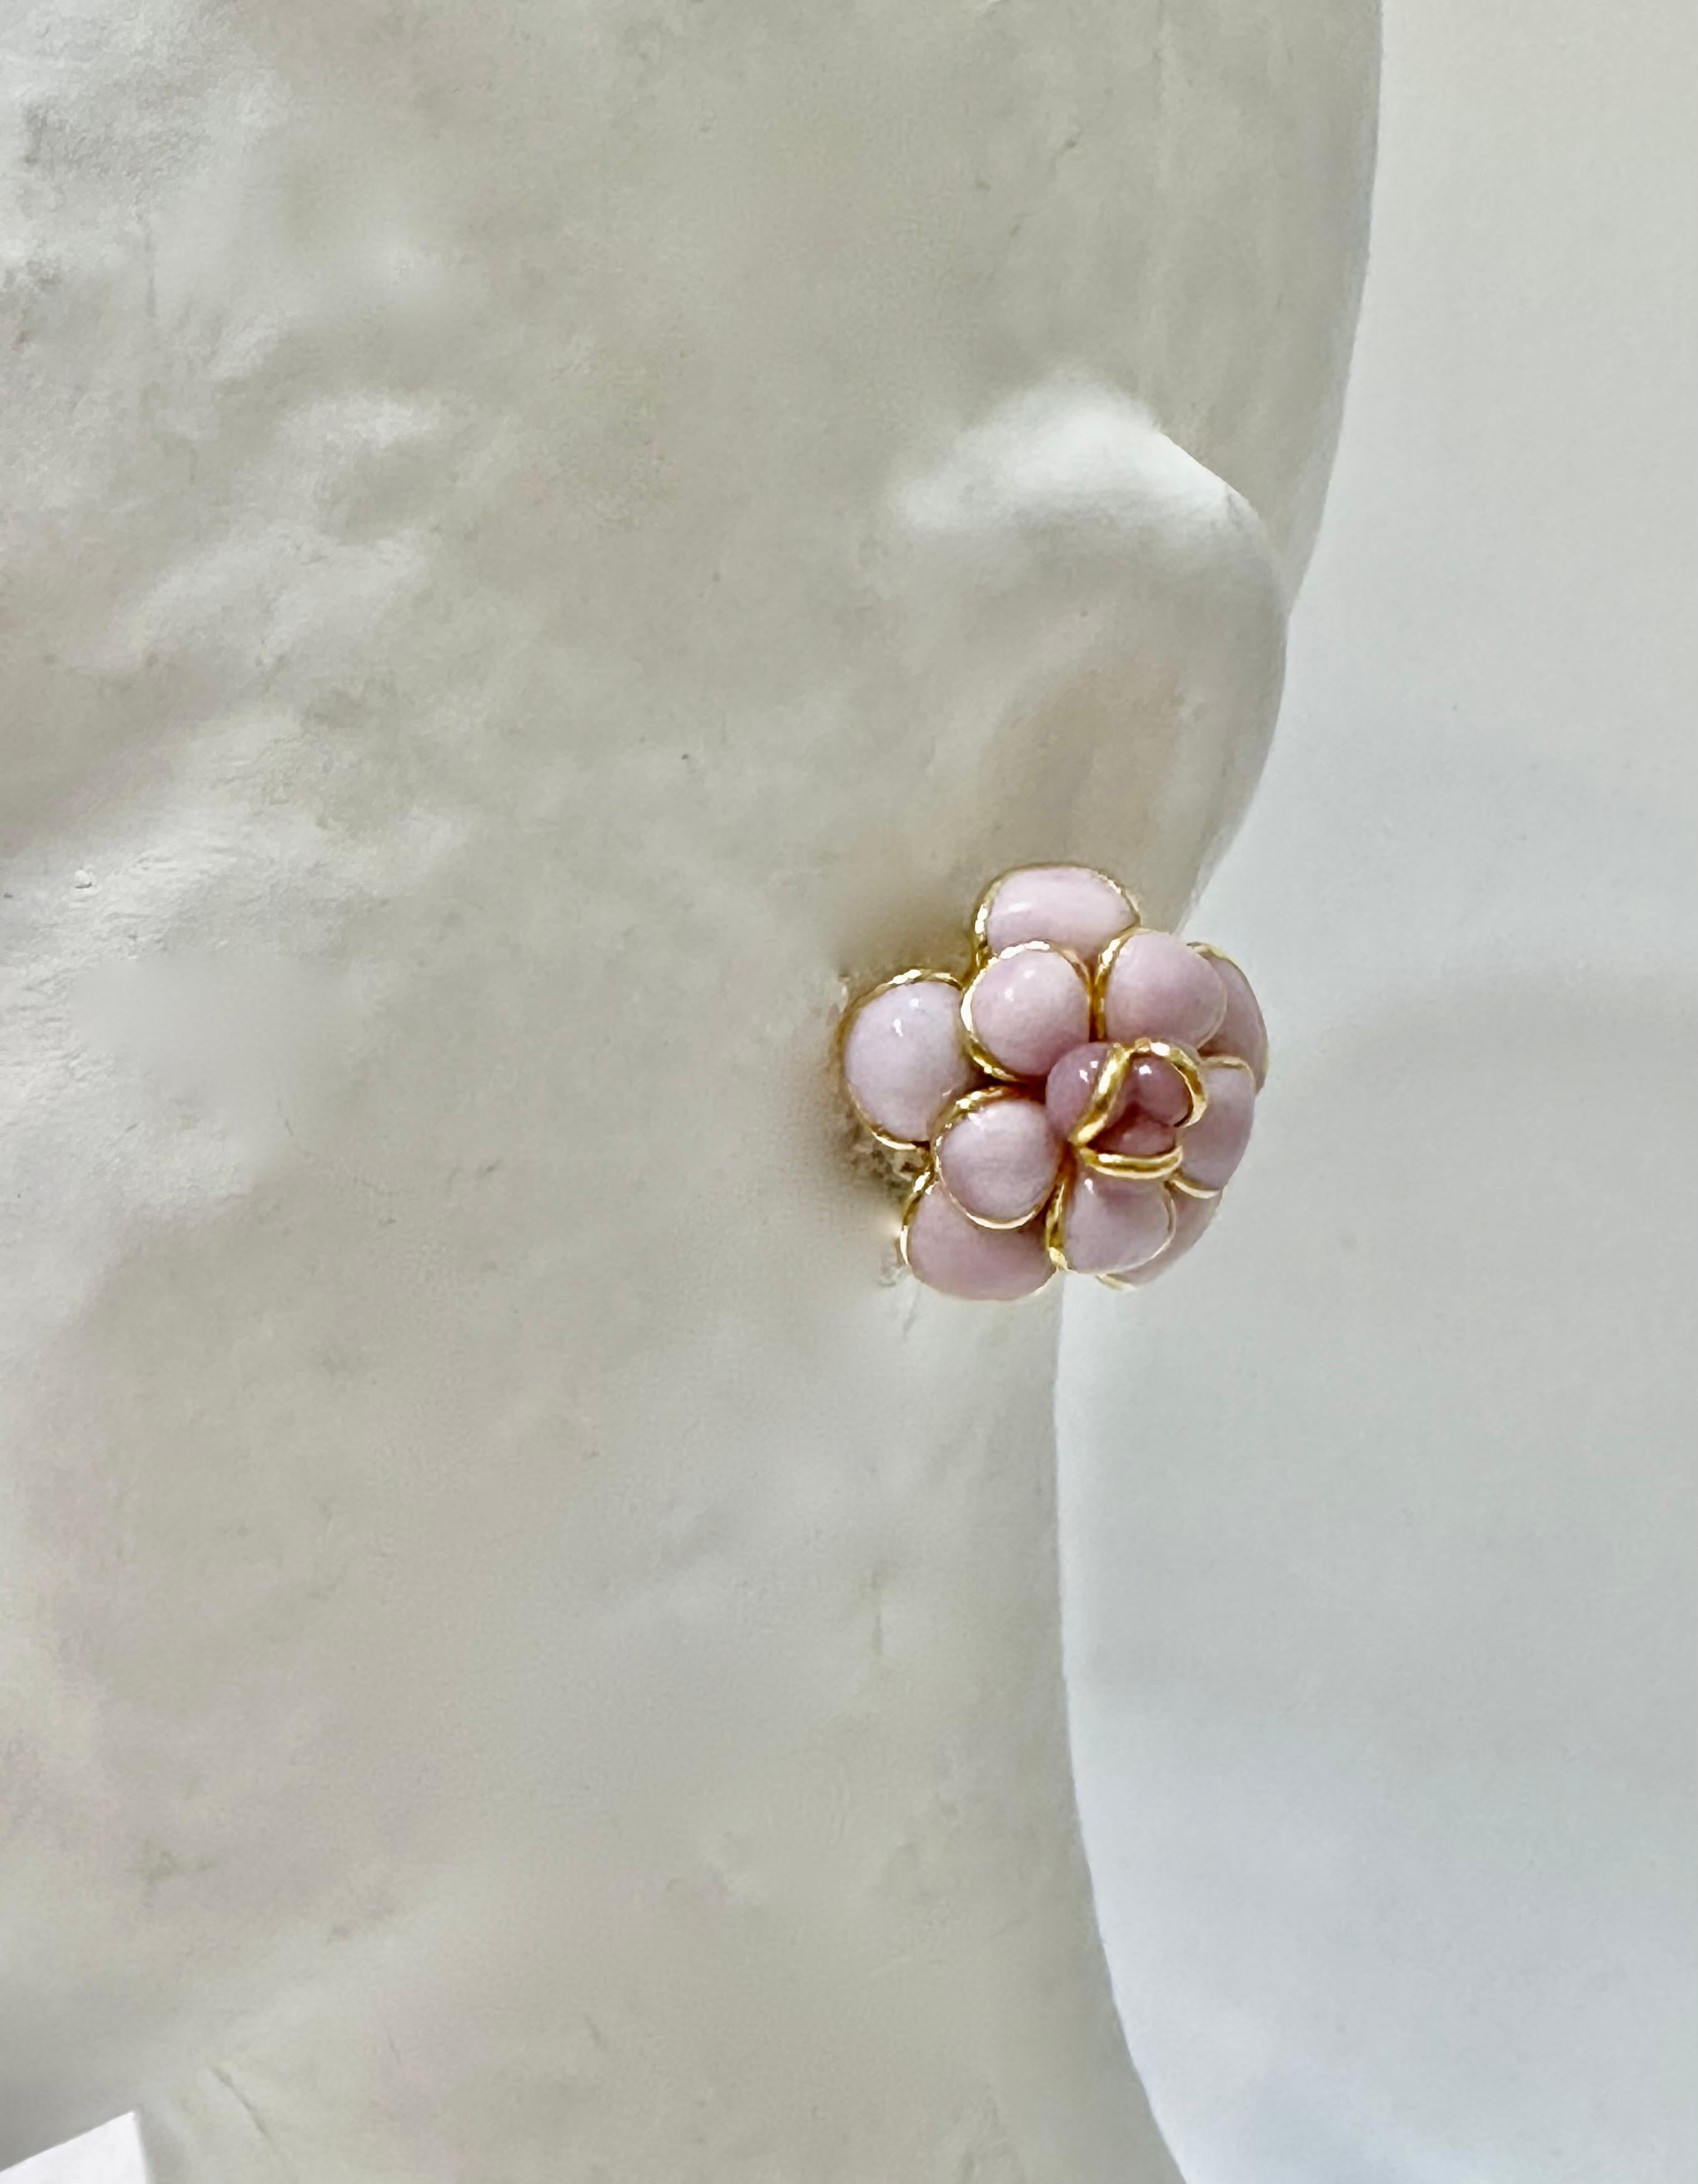 Pate de Verre Blush Pink Camelia Earrings In New Condition For Sale In Virginia Beach, VA